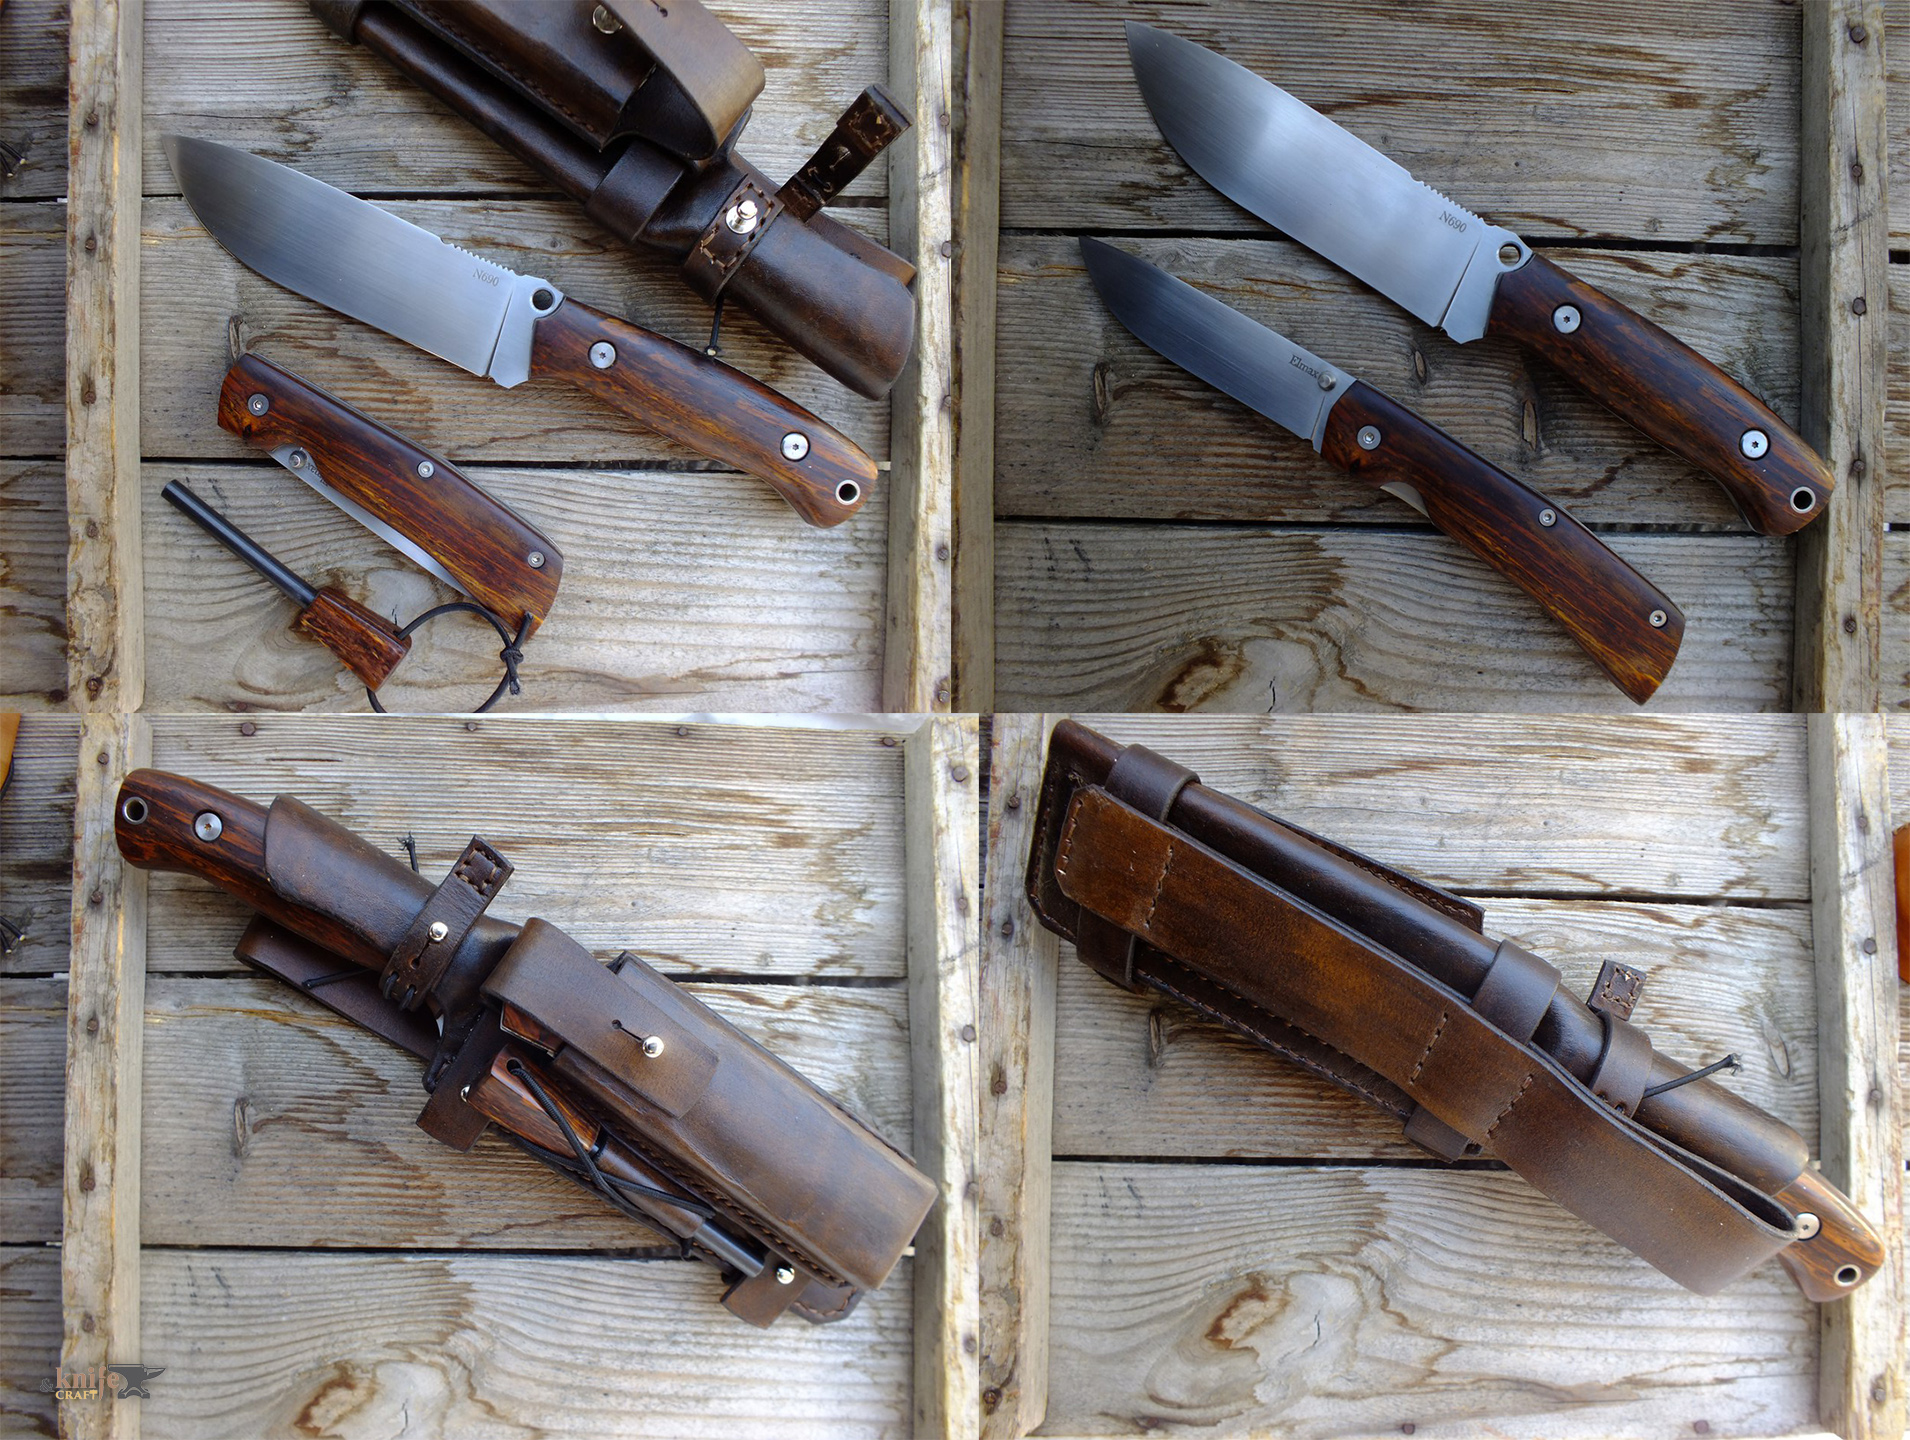 A hunting pair for bushcraft, complete with a folding knife and a flint in the sheath with N690 blade to order in Russia